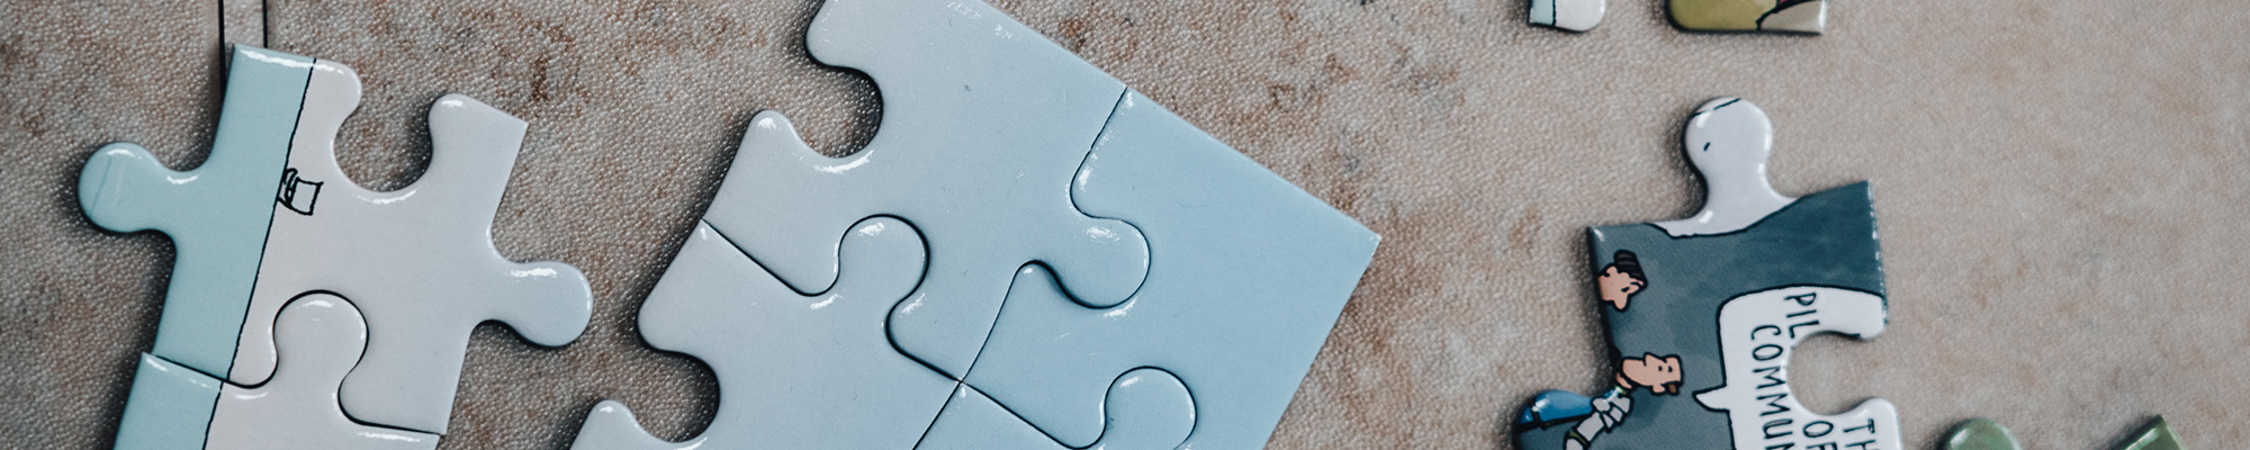 Five questions to ask when recruiting contract and interim staff - Blue puzzles and jigsaw fitting together - VMAGROUP